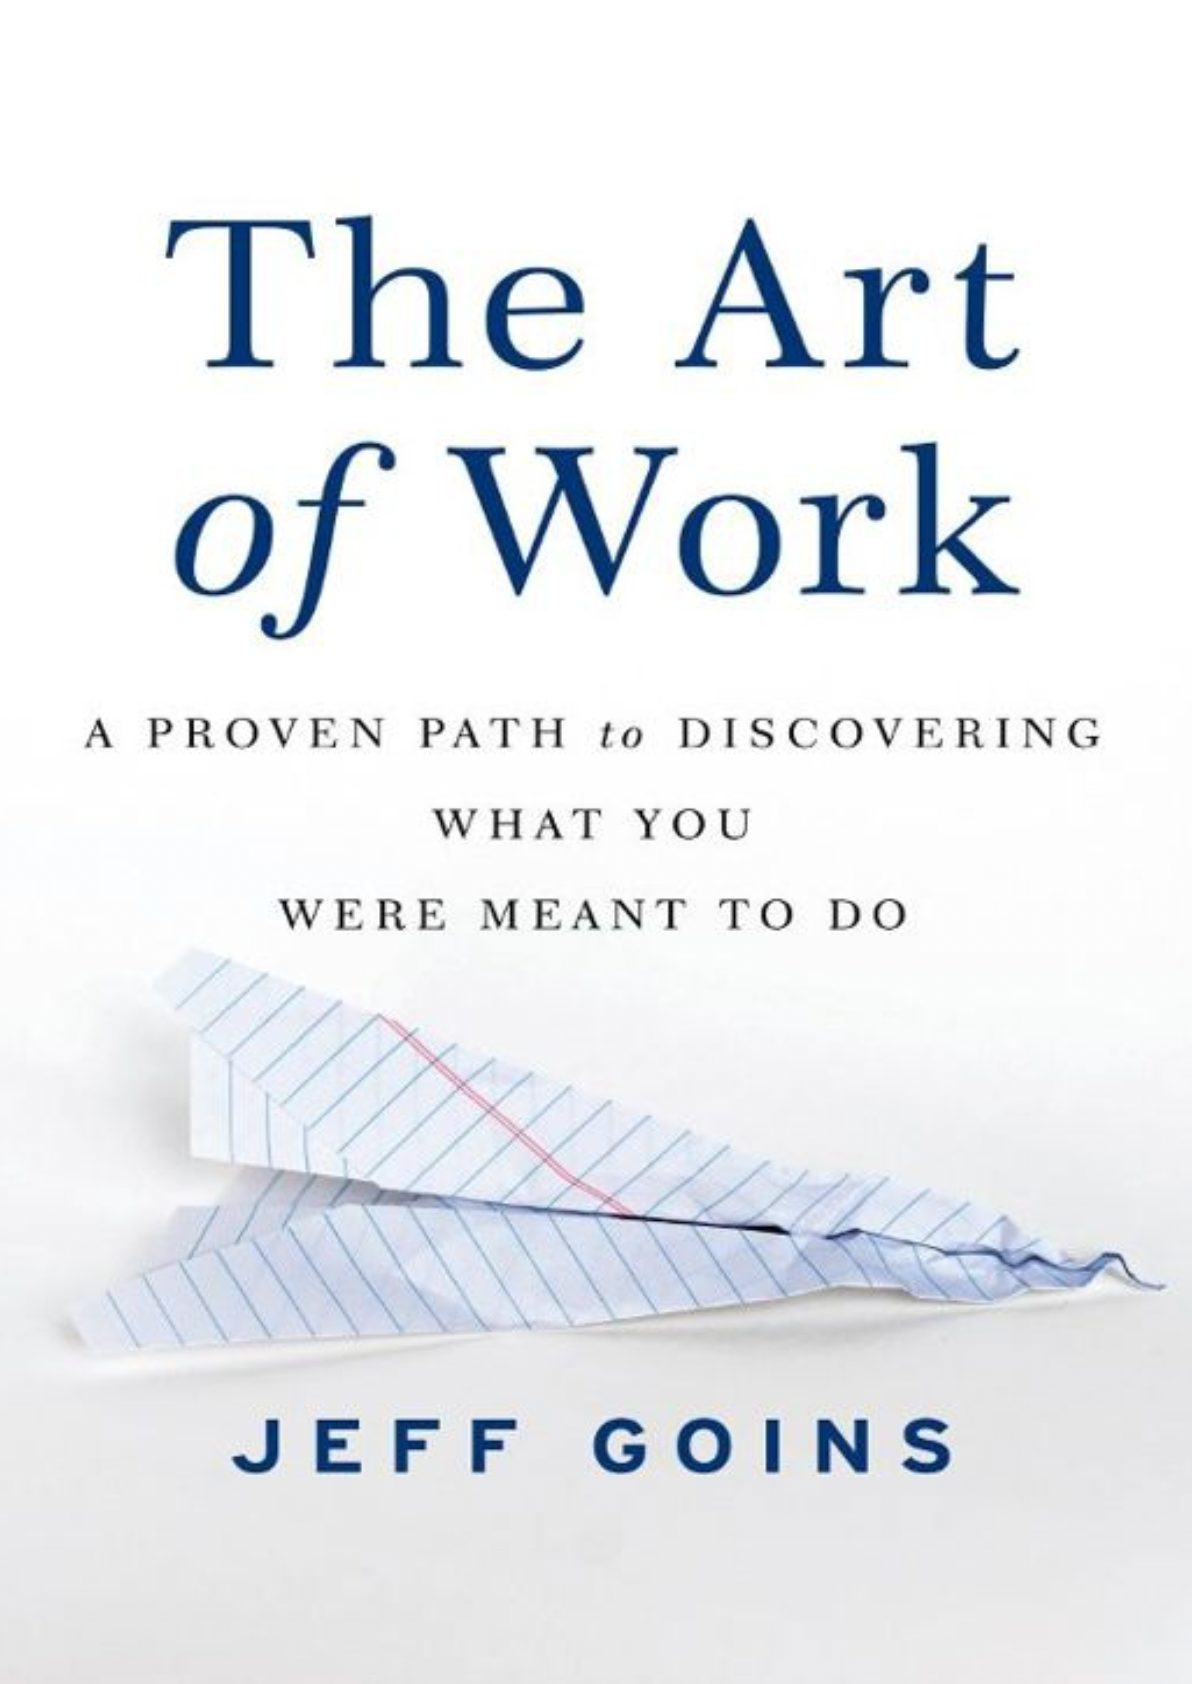 The Art of Work A Proven Path to Discovering What You Were Meant to Do